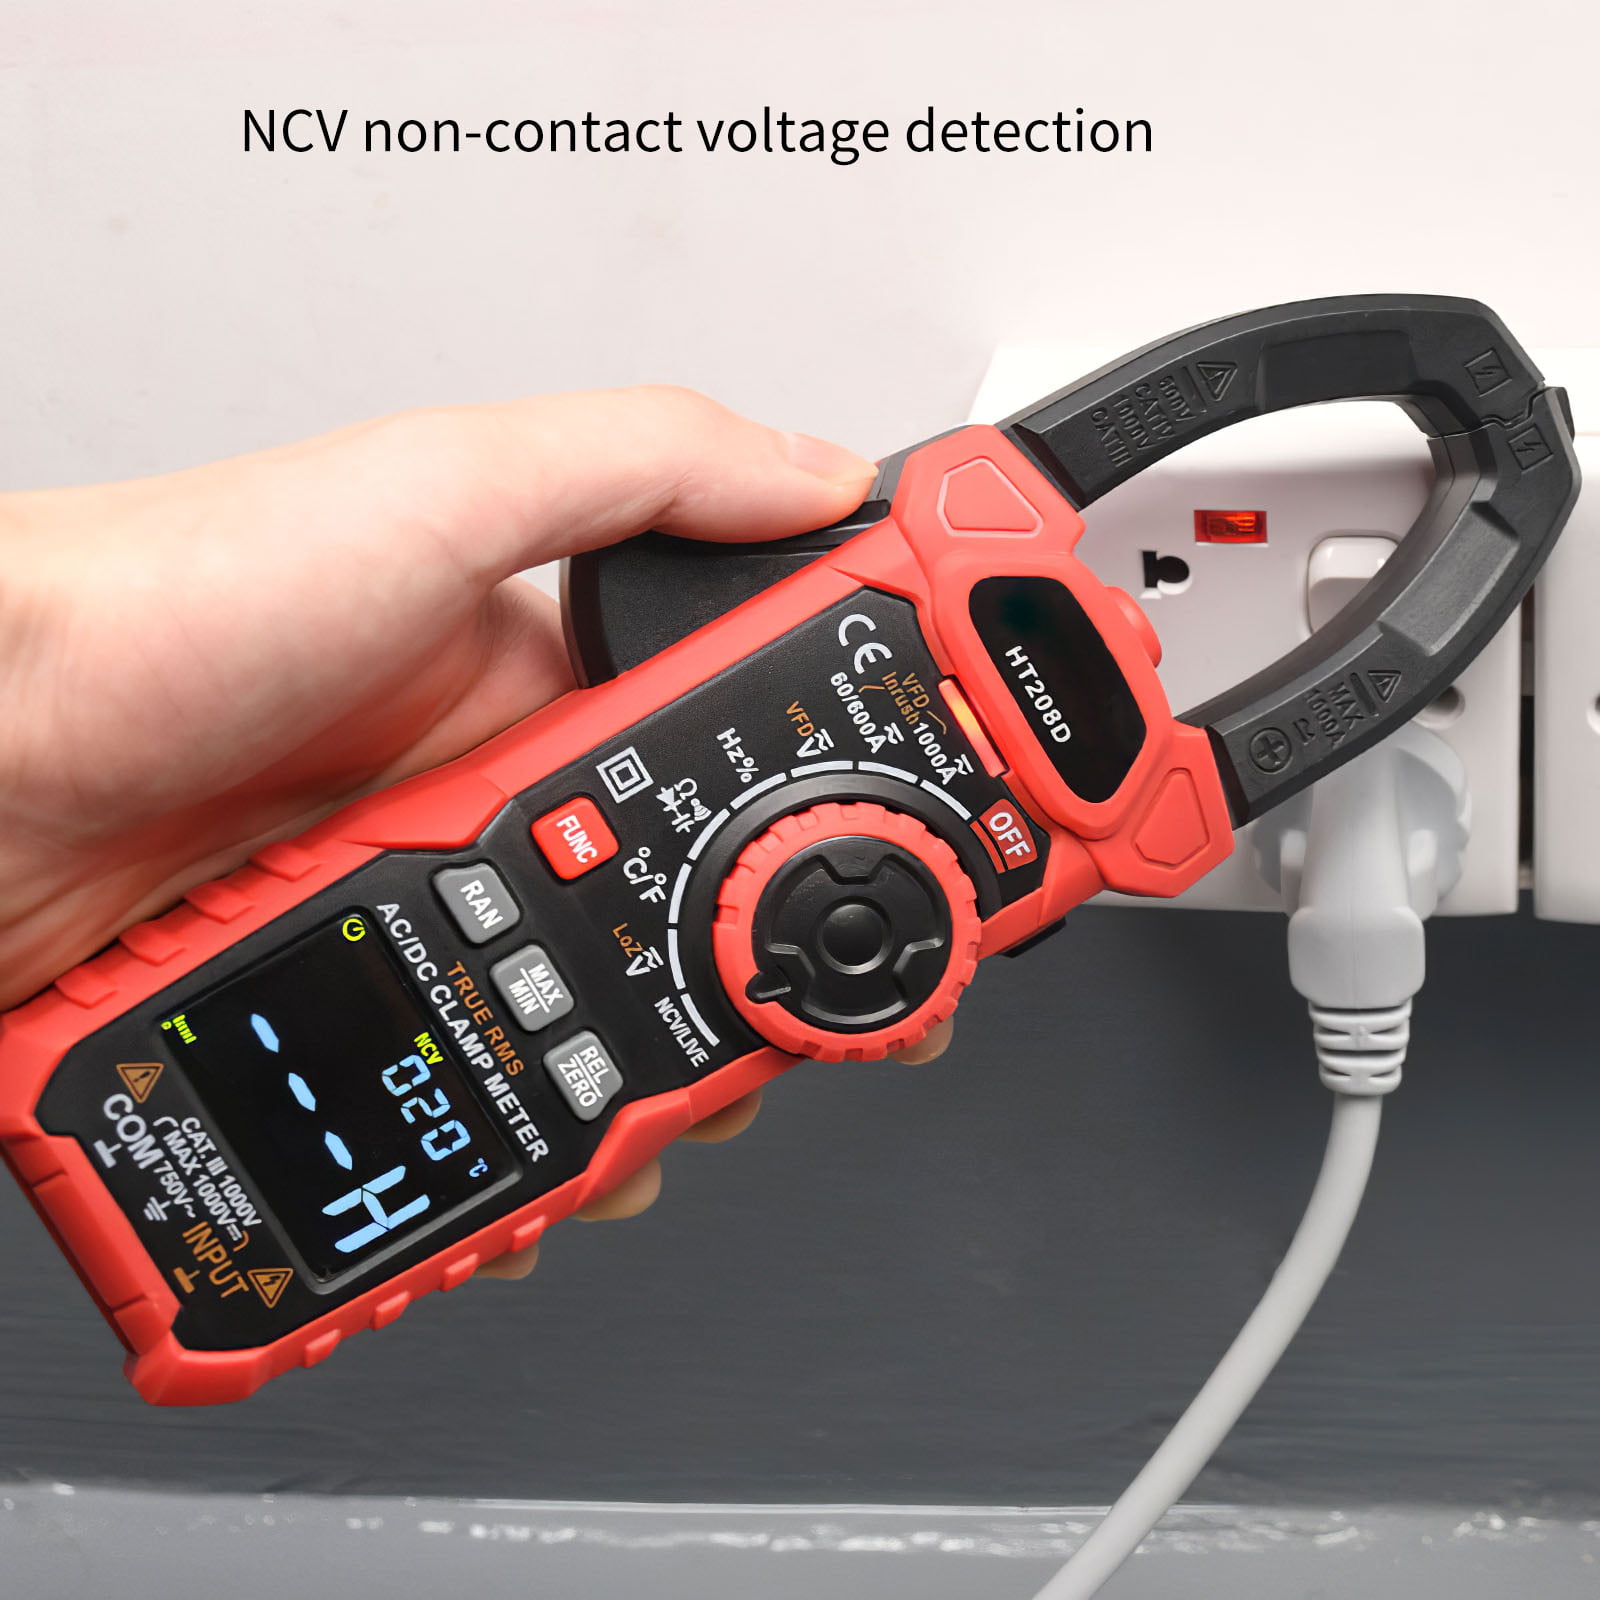 VFD LOZ Mode Voltage Tester Auto-Ranging AC/DC Current Amp Meter 6000 Counts VVL Digital Clamp Meter 1000A T-RMS Multimeter Measures Temperature Continuity Capacitance Resistance Diodes Duty-Cycle 